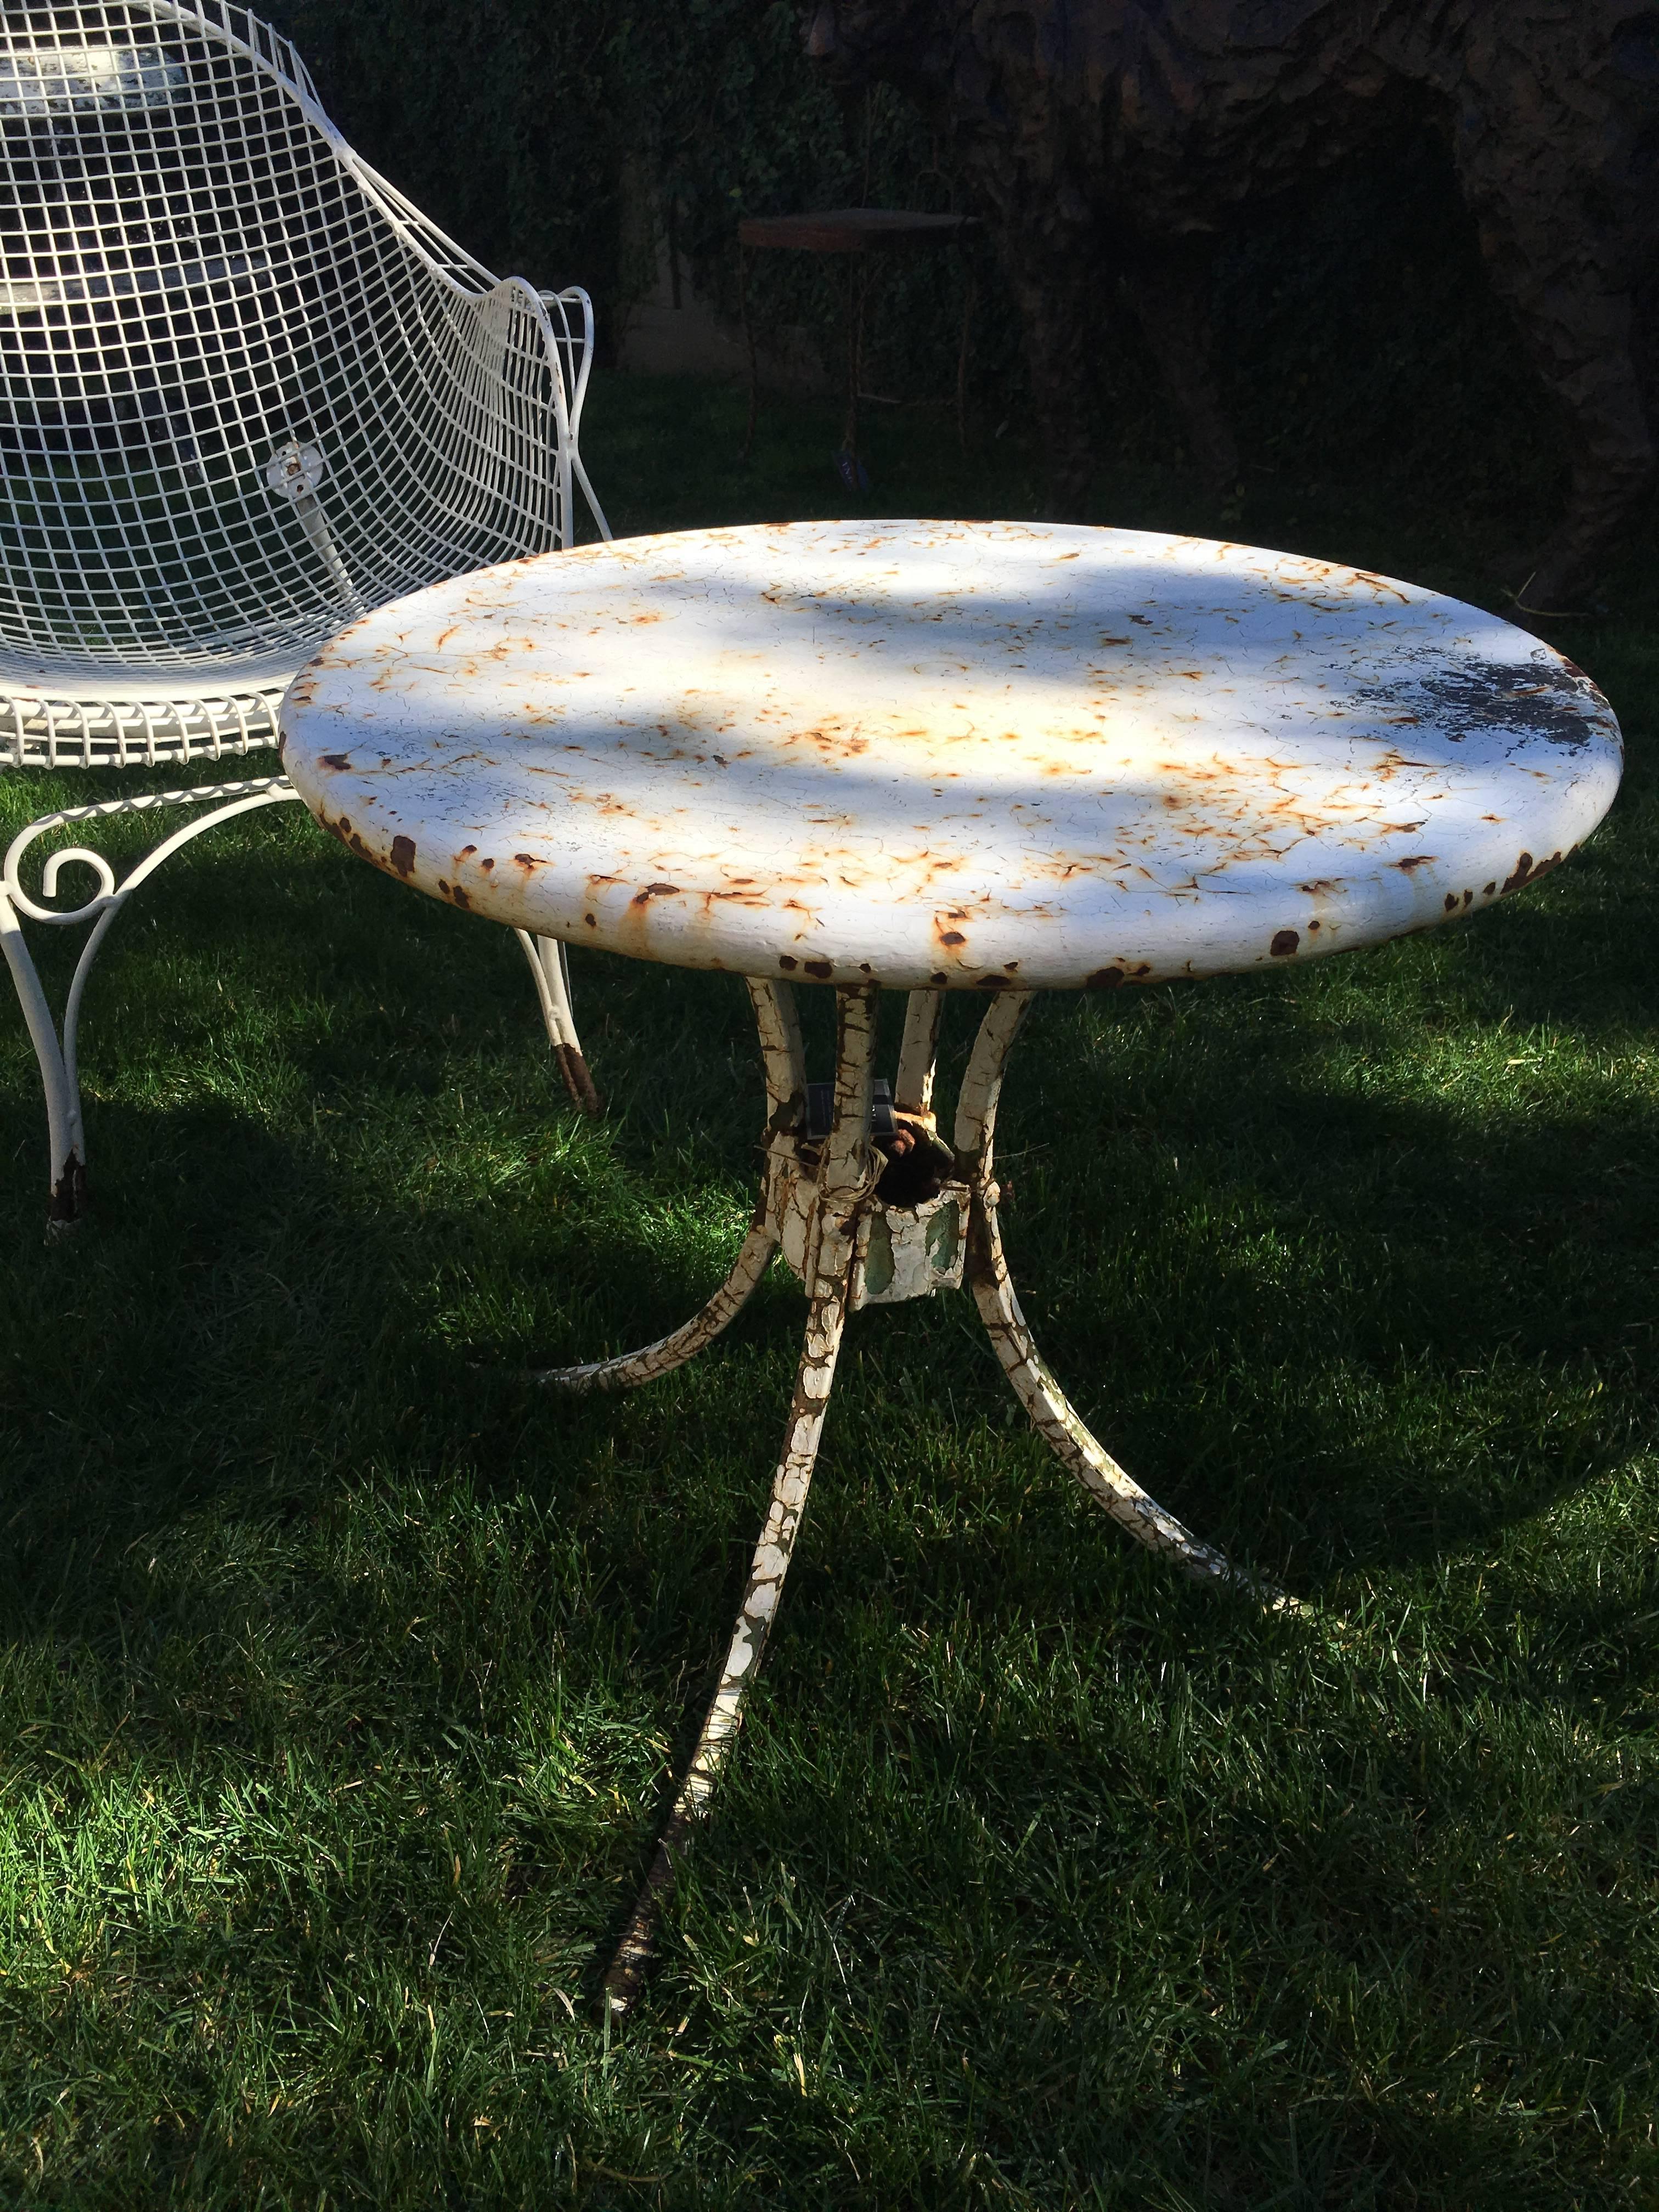 Vintage American metal garden side table, circa 1950. Table surface painted white with thick crackling. Legs are painted white as well, with layer of green revealed below. Tabletop and legs in two separate pieces. 

    